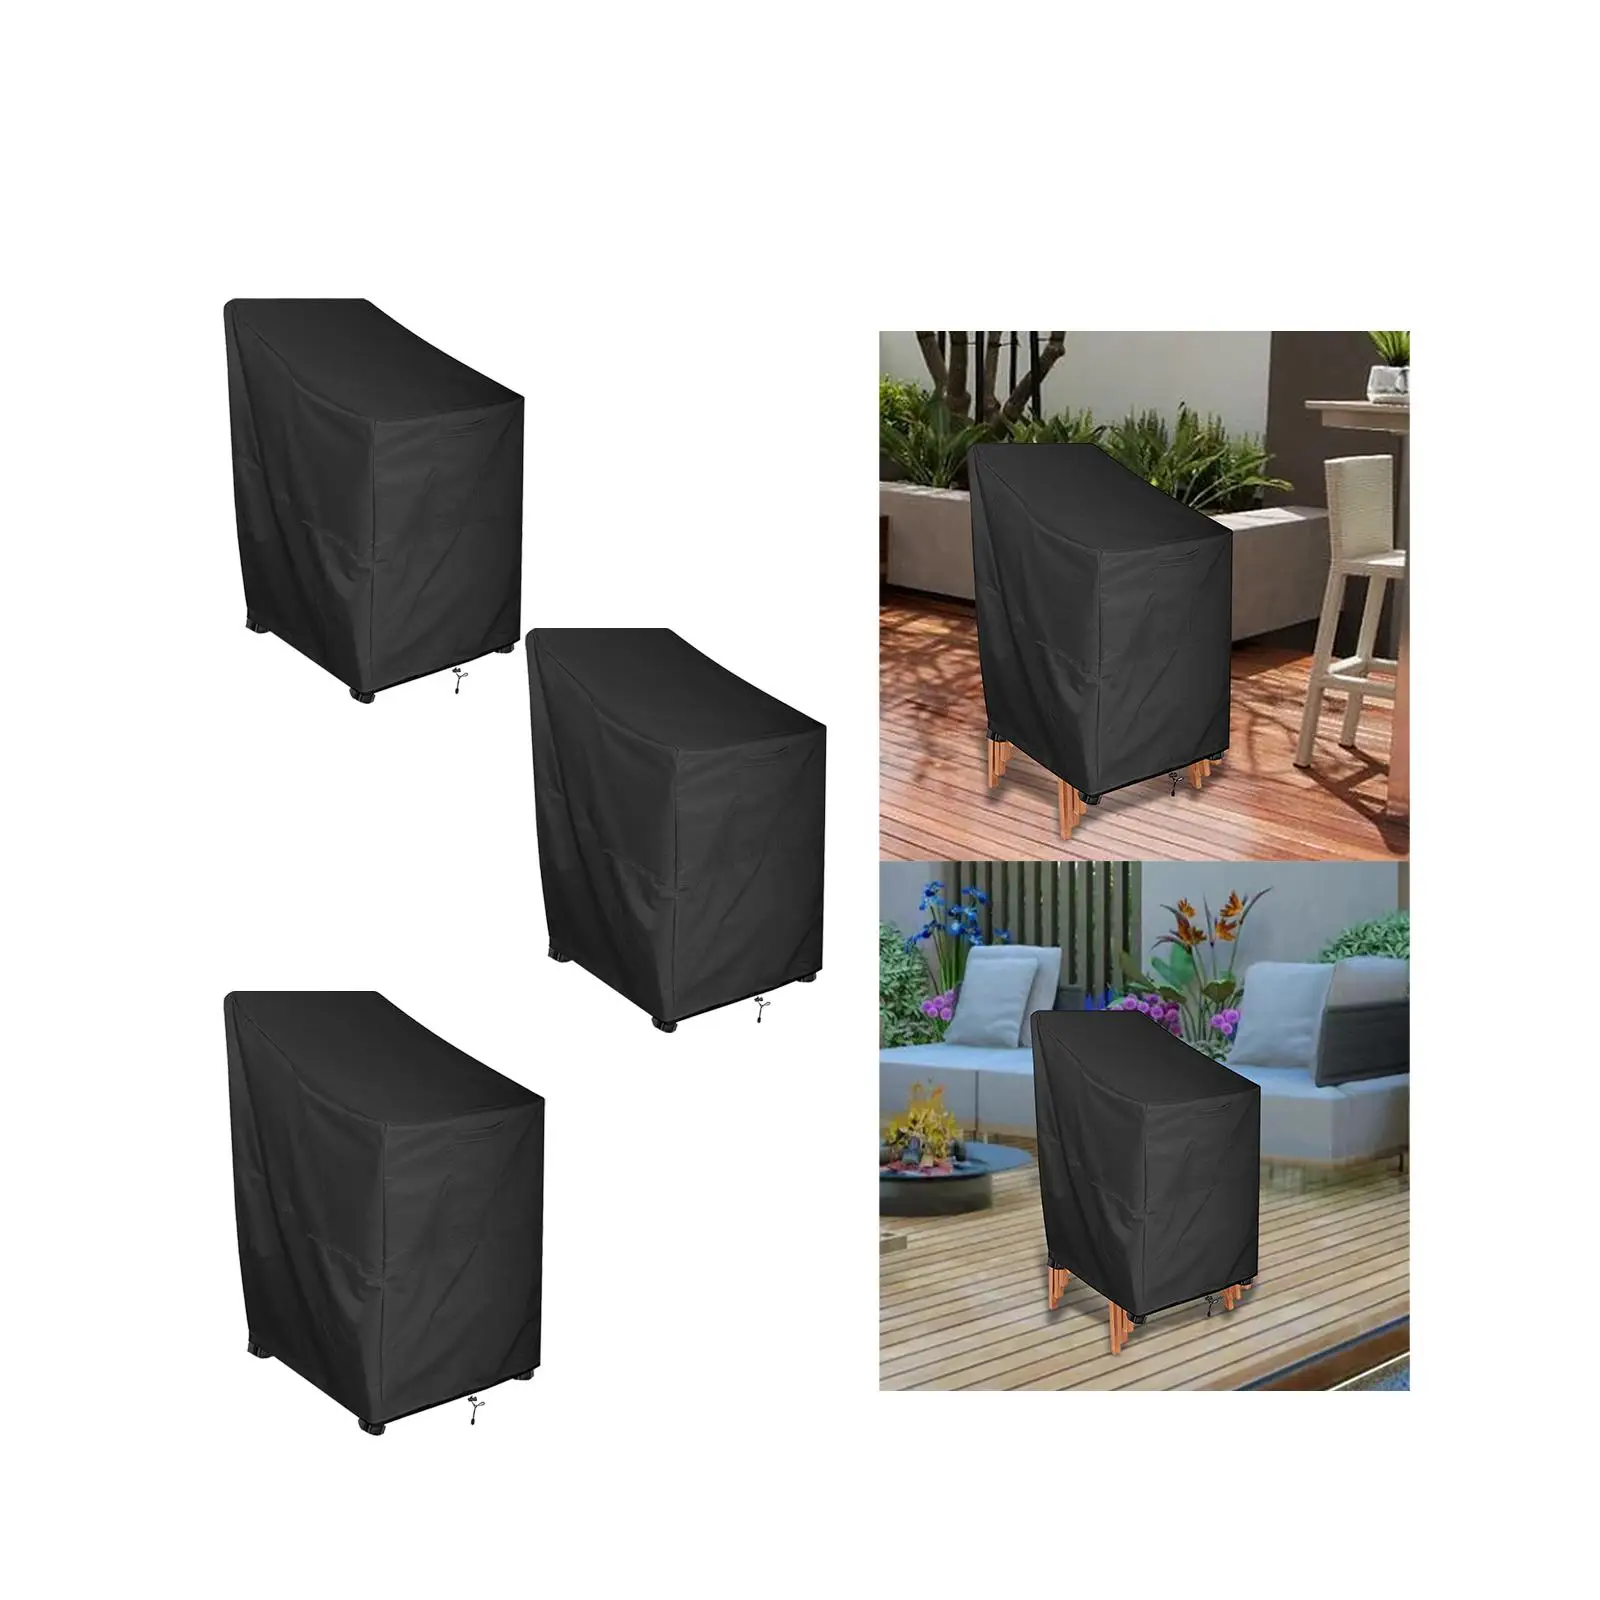 Folding Chairs Cover Waterproof Furniture Protector Heavy Duty Tear Resistance Durable High Back Chair Covers Patio Chair Covers